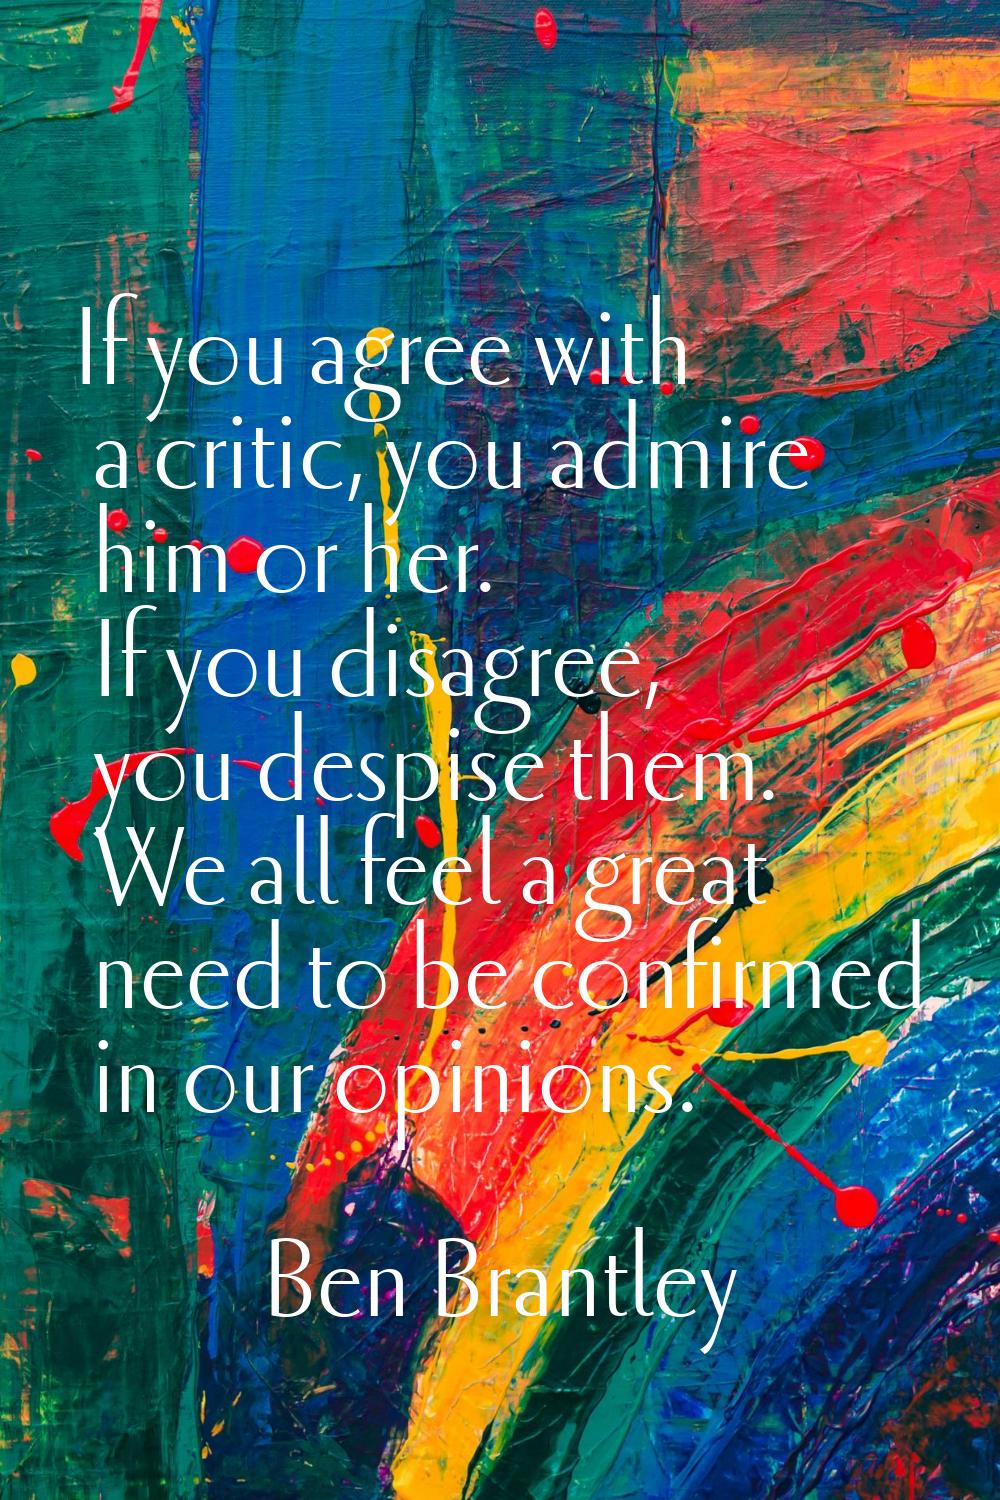 If you agree with a critic, you admire him or her. If you disagree, you despise them. We all feel a